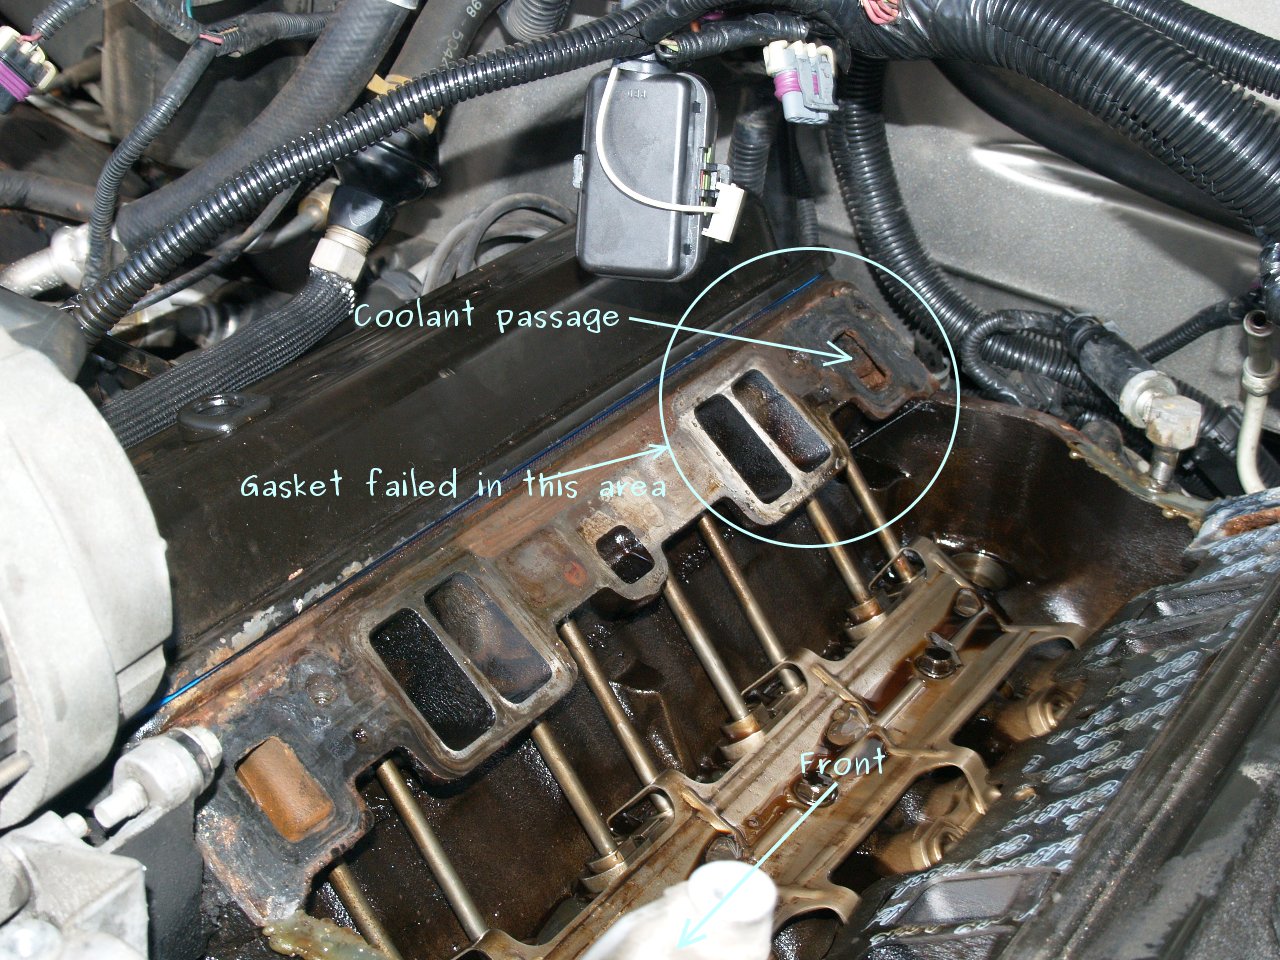 See B1246 in engine